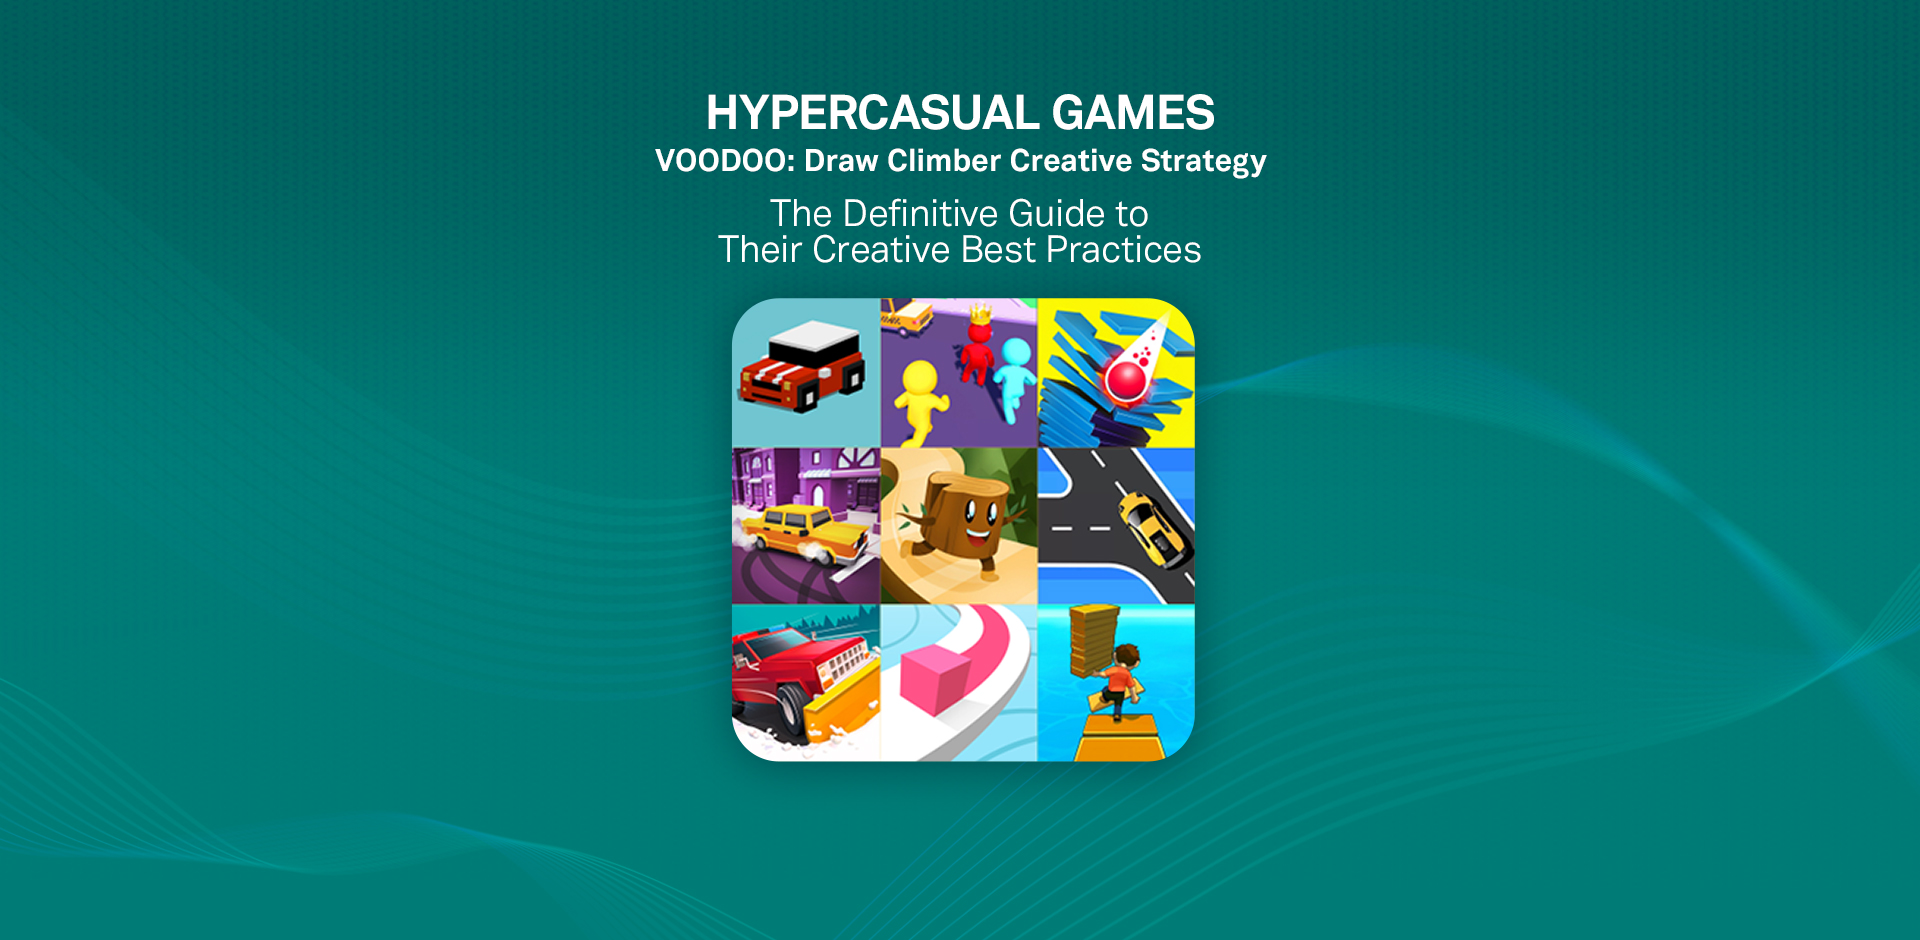 Hypercasual Games Voodoo’s Draw Climber Creative Strategy